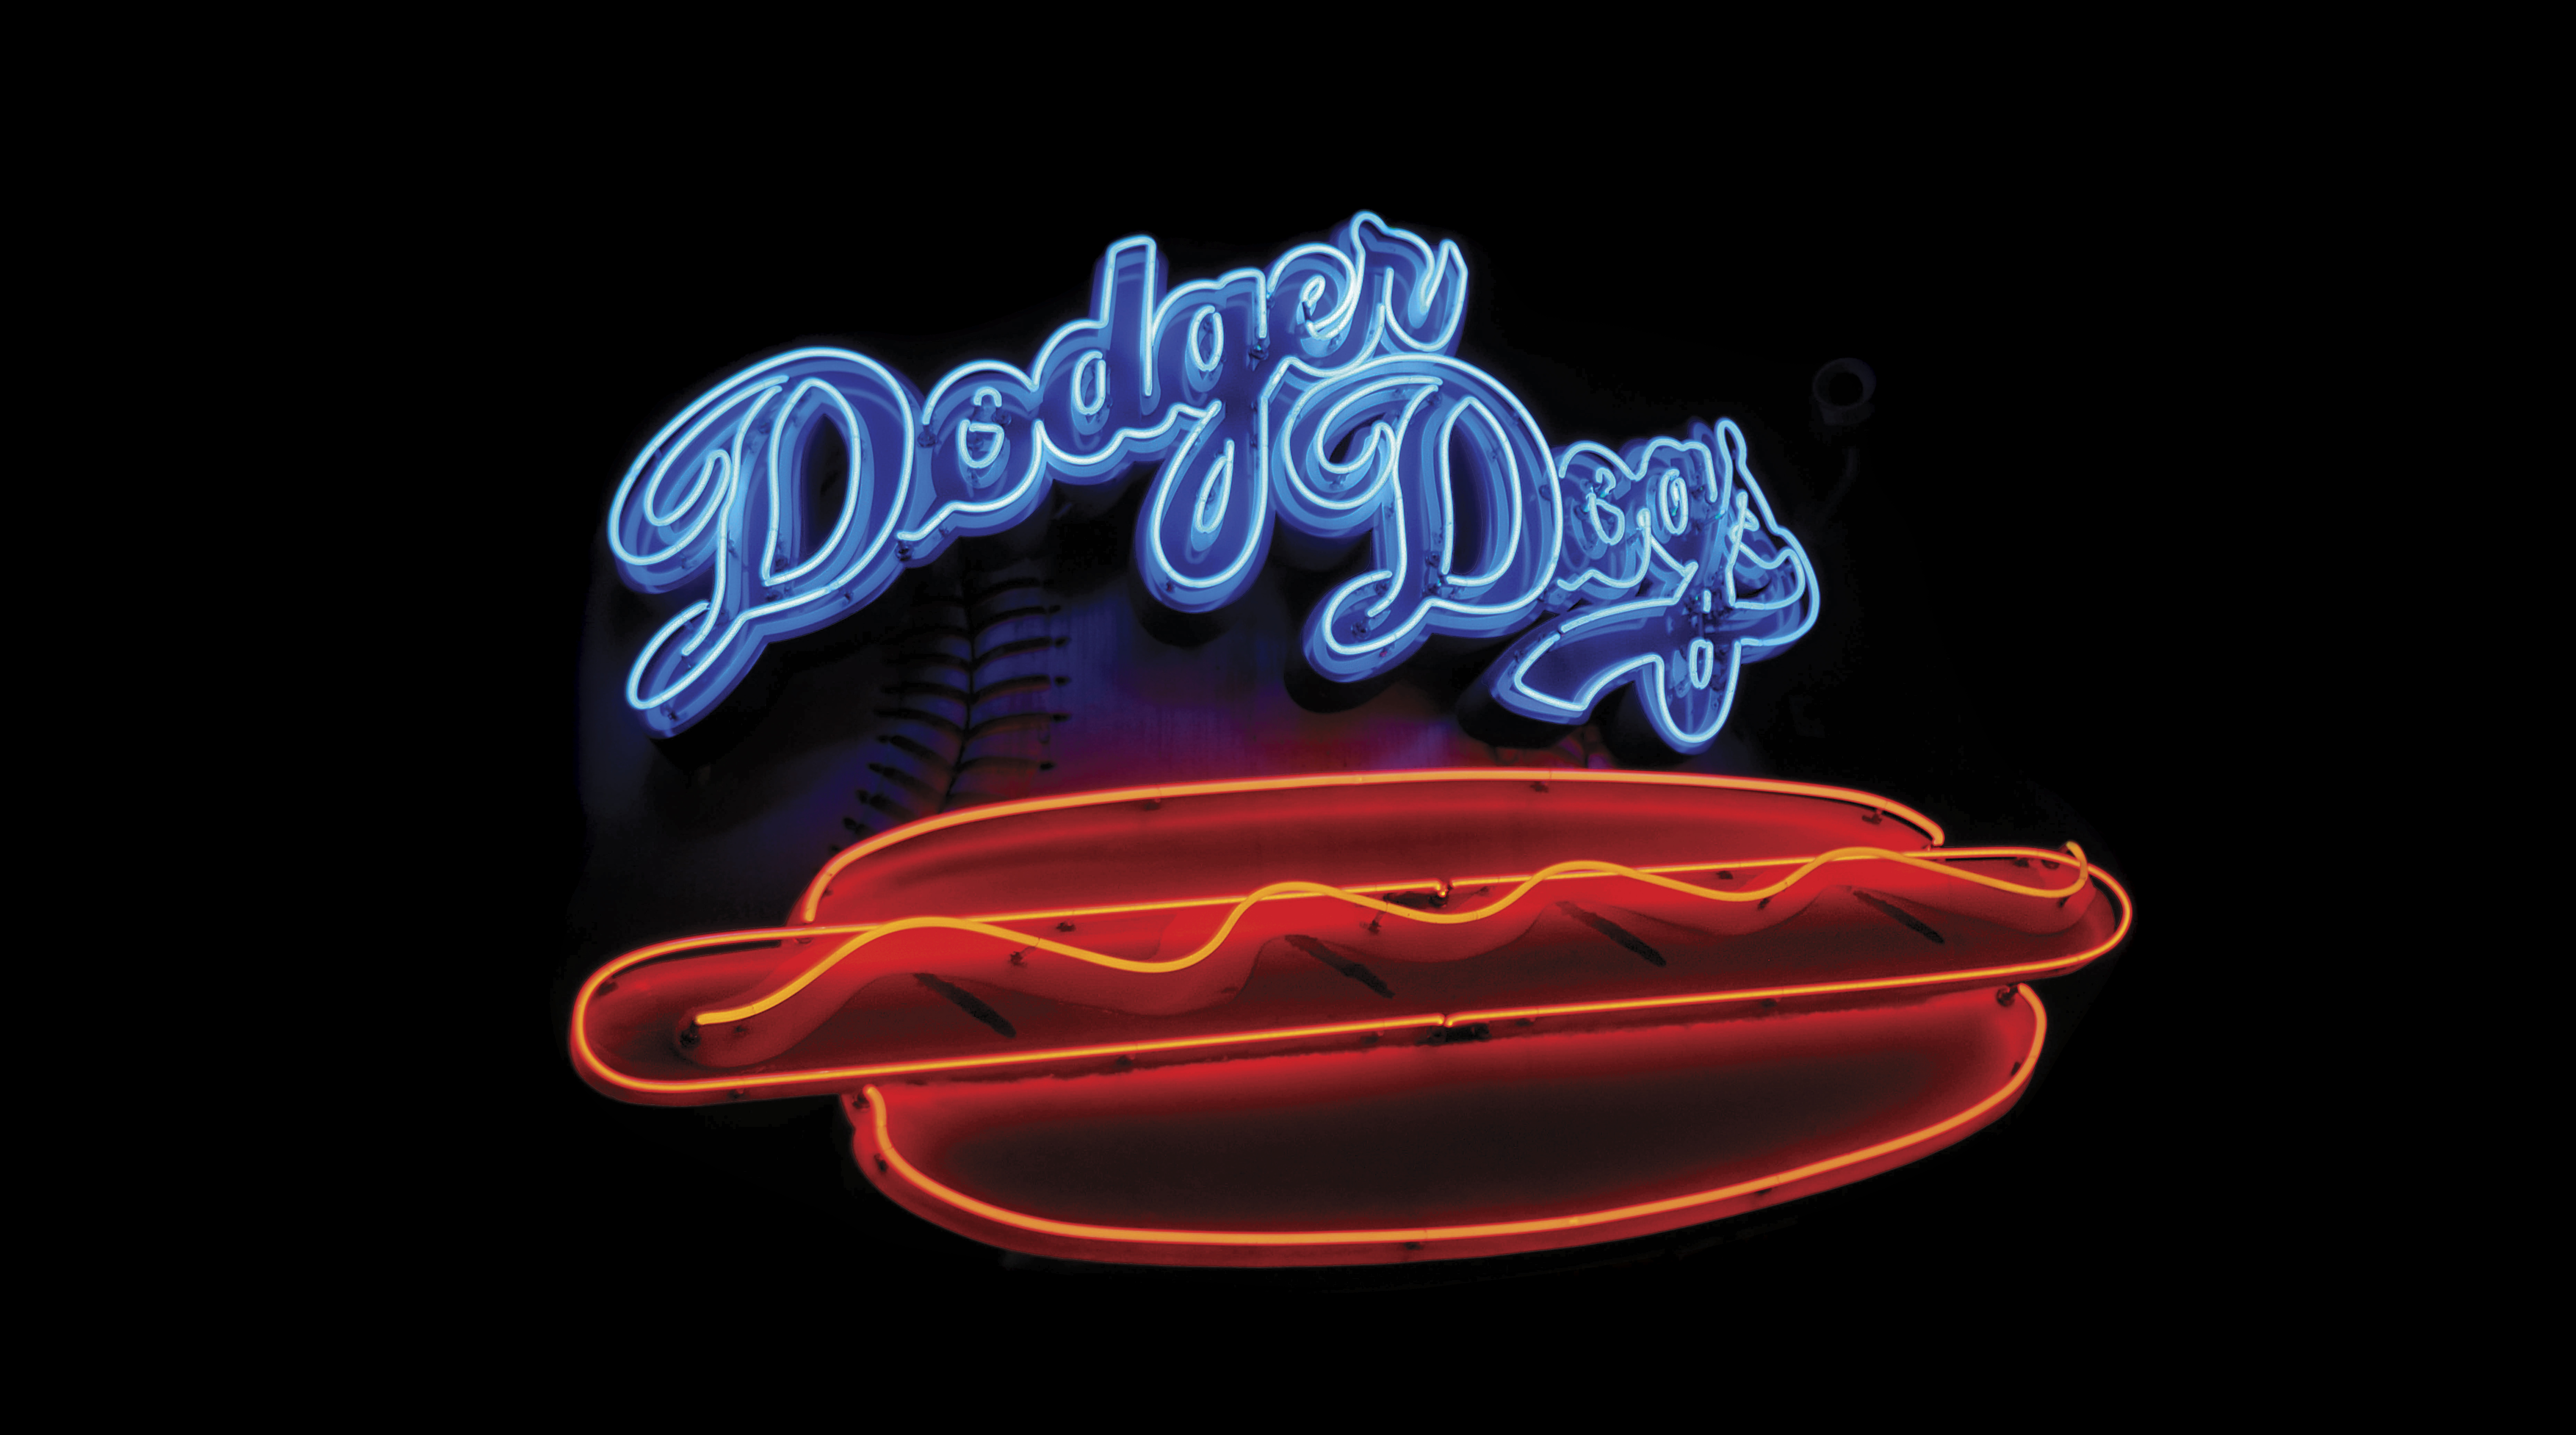 Dodger Dog history, legacy as most iconic hot dog in sports - Sports Illustrated